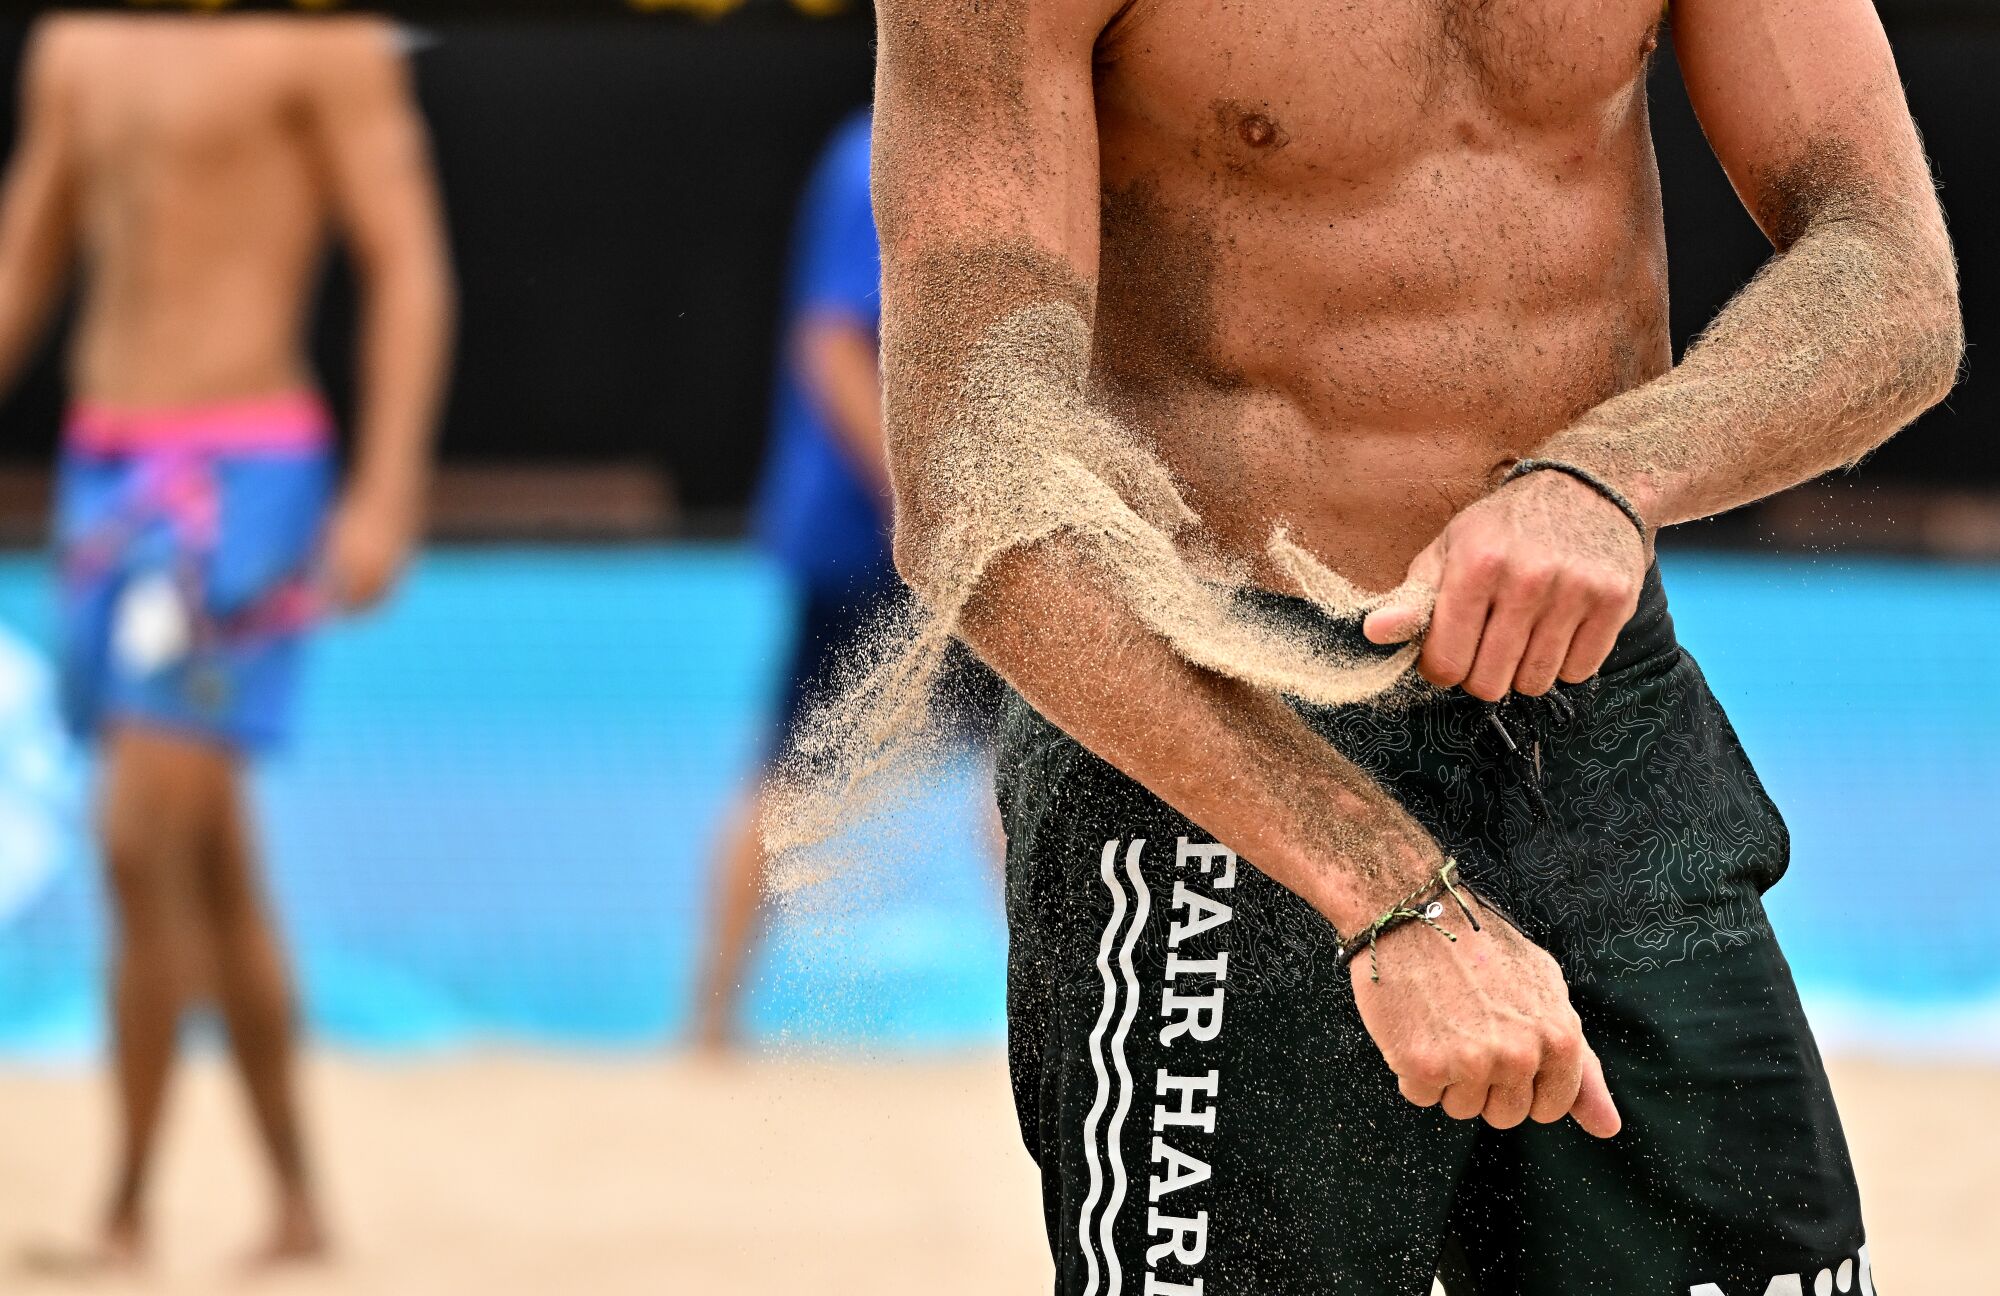 Jeremy Casebeer rubs sand on his arms during a quarterfinal match.